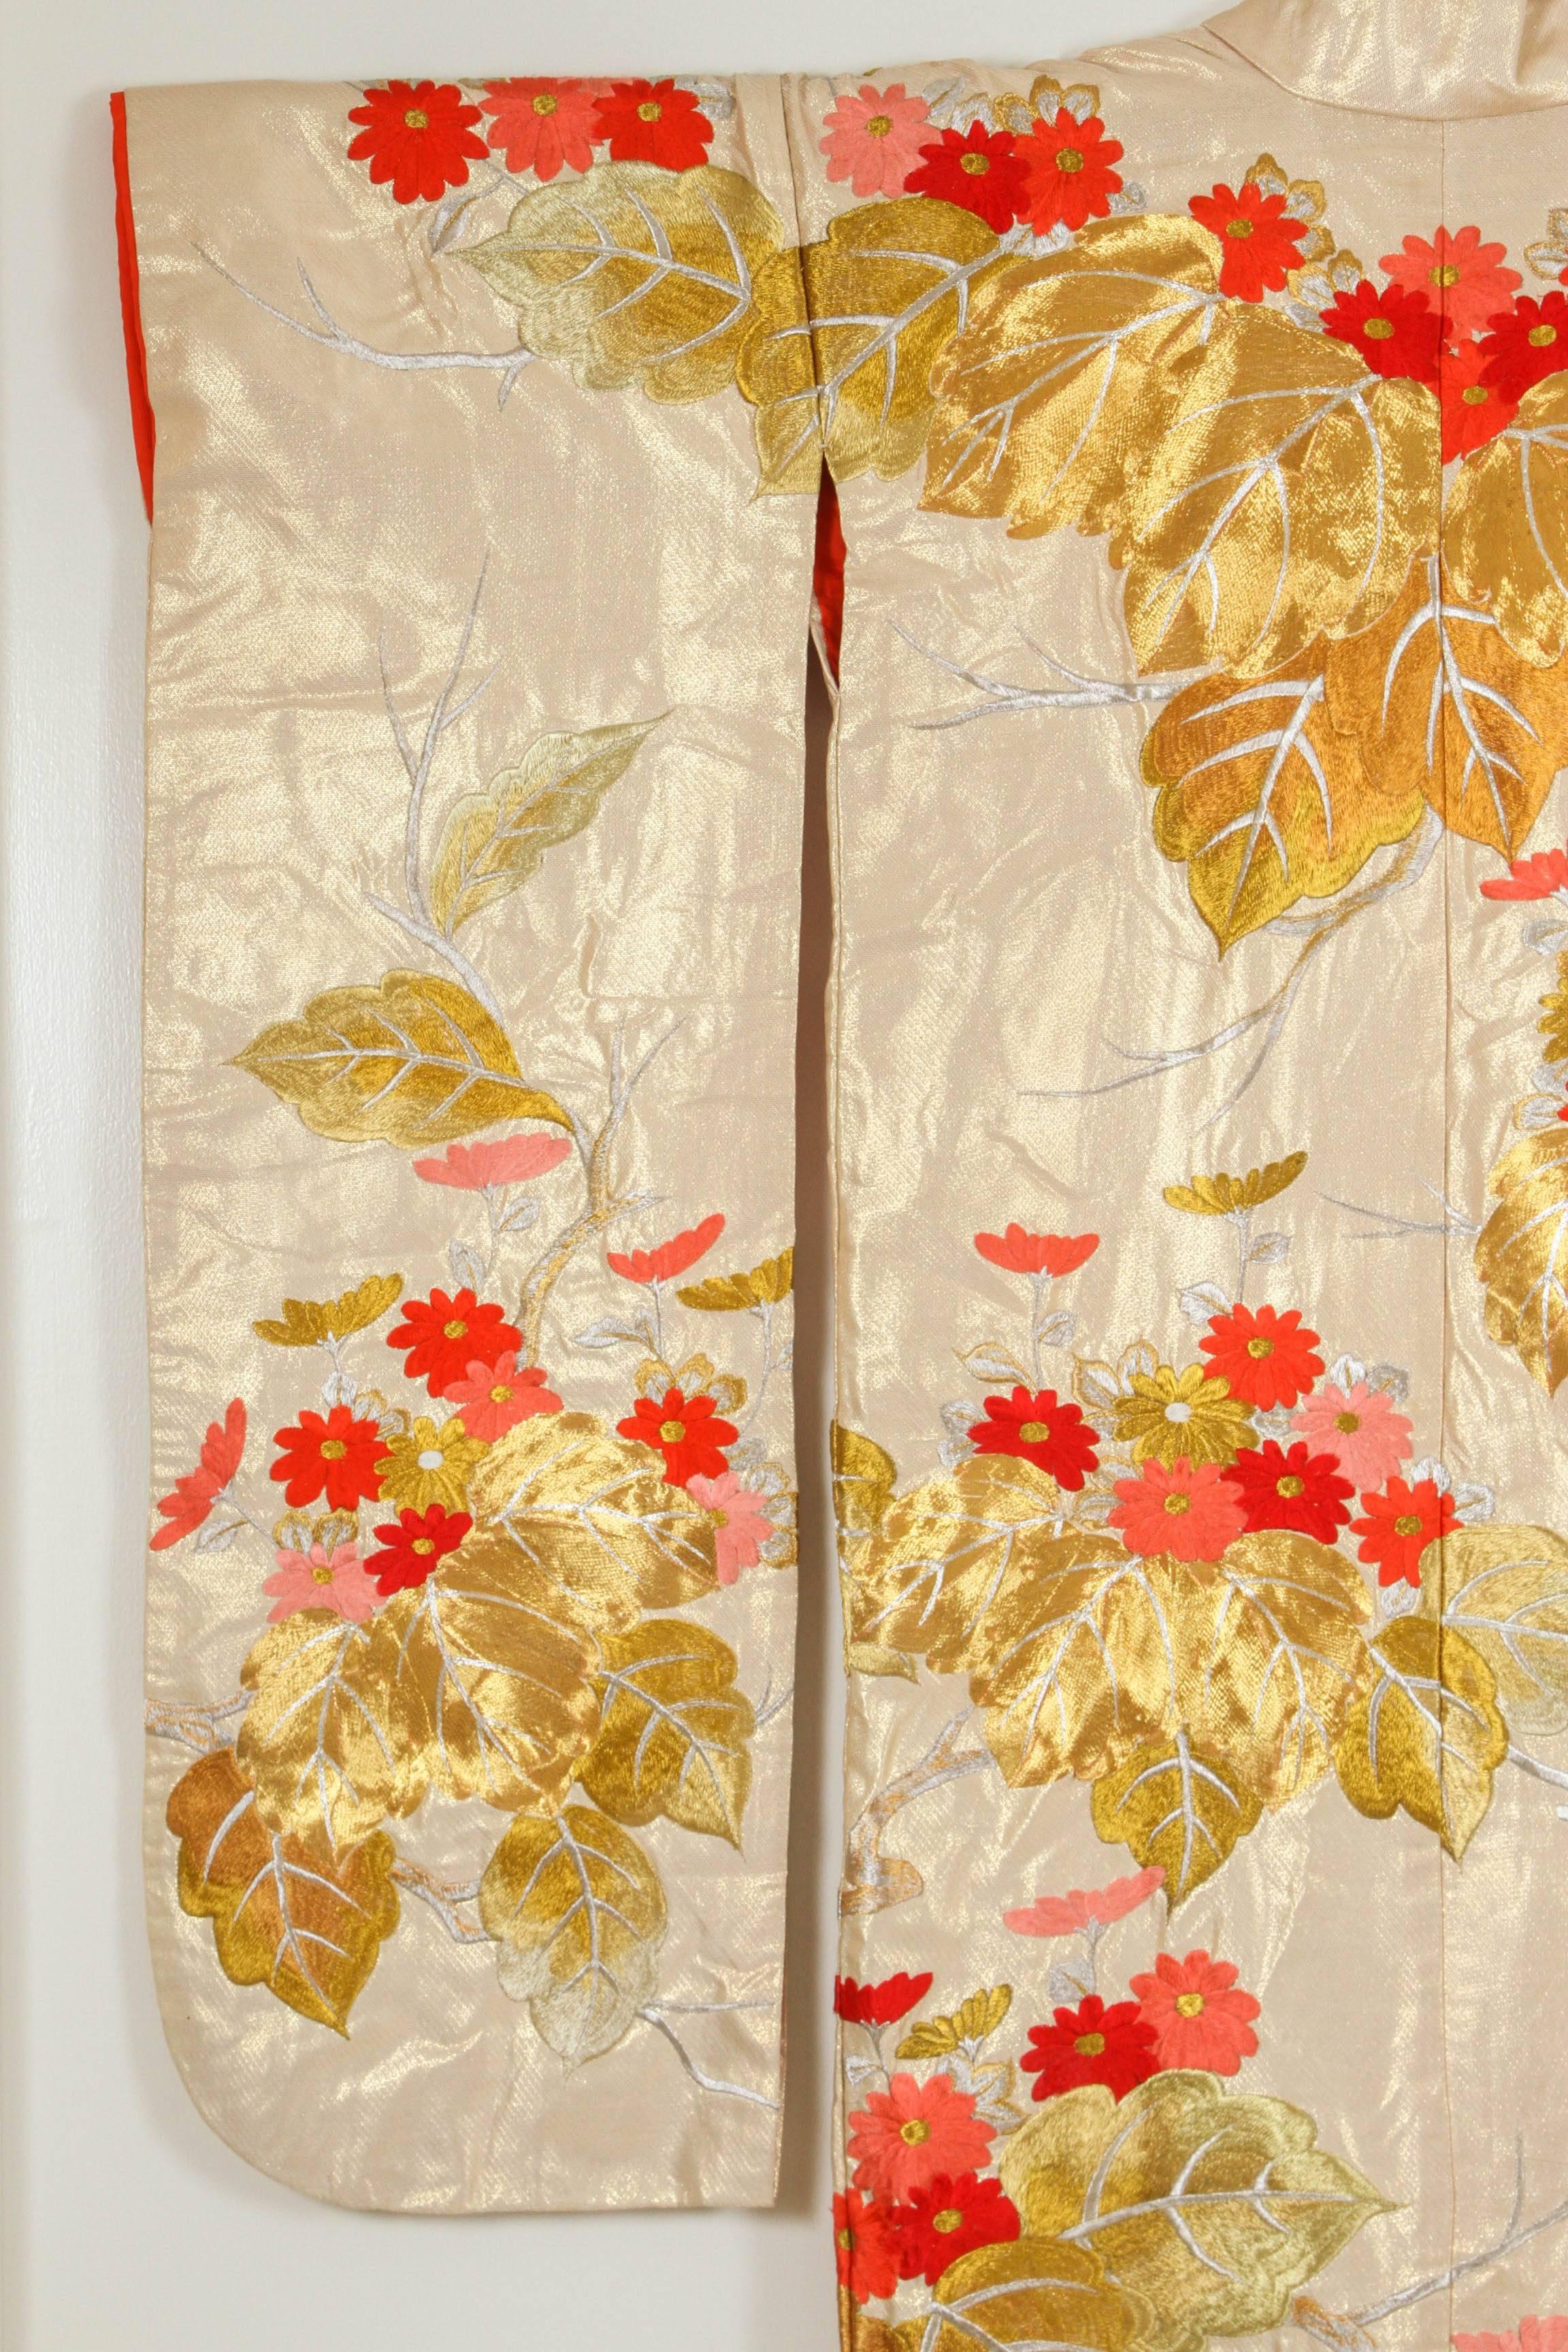 Vintage brocade Japanese ceremonial kimono a vintage Mid-Century ivory color collectable Japanese ceremonial kimono. One of a kind hand crafted .
Fabulous museum quality ceremonial piece in pure silk with intricate detailed hand-embroidery